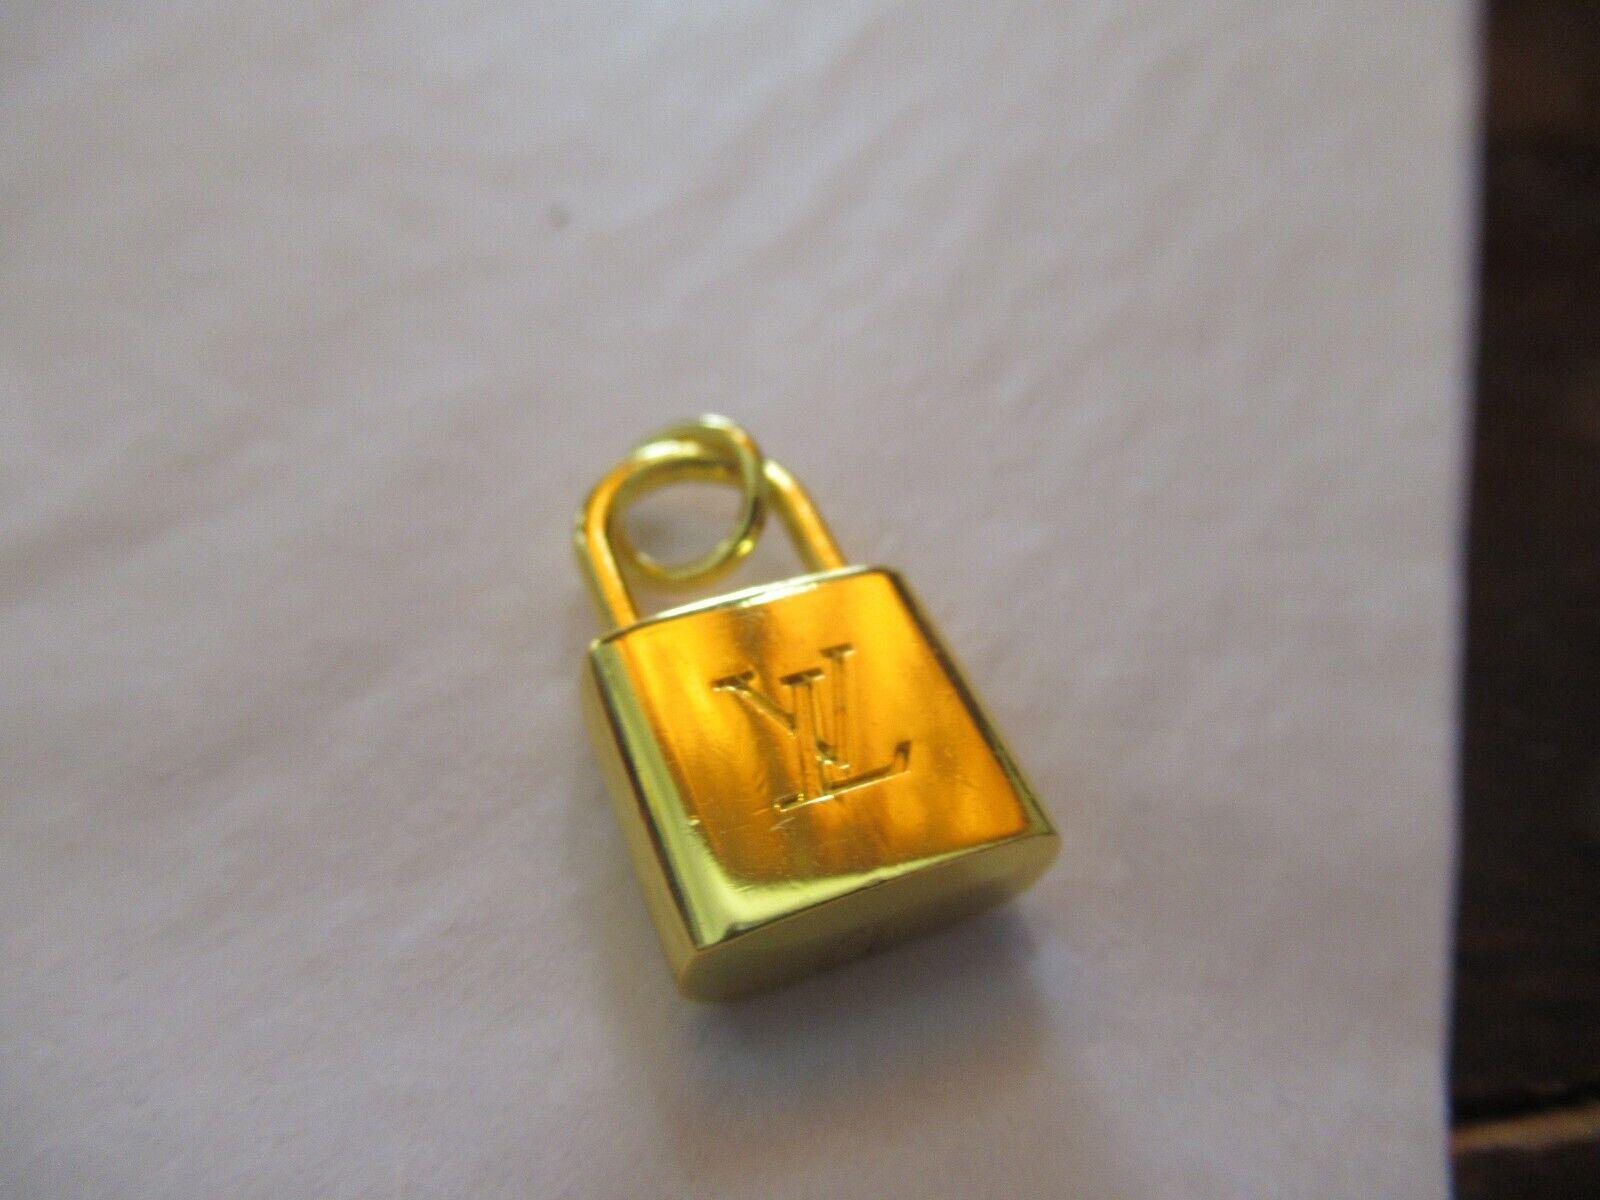 LV VUITTONS  1 ZIP PULL  charm  19x12MM , VIVID GOLD  tone,   THIS IS FOR 1 LOCK